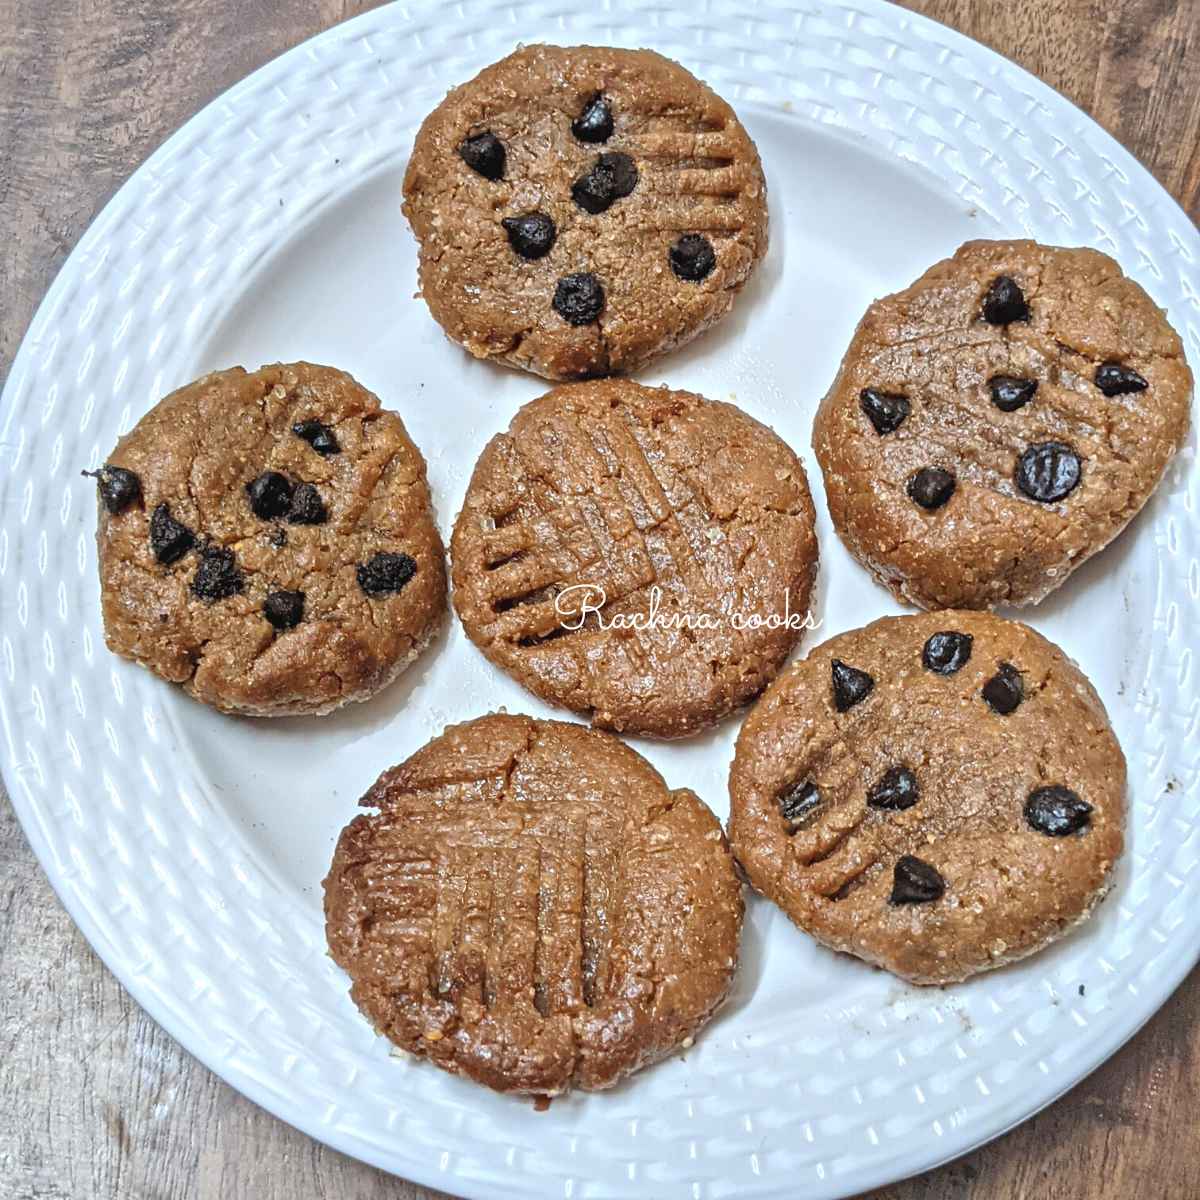 6 peanut butter cookies on a white plate, 2 of them having no chocolate chips and the rest with chocolate chips